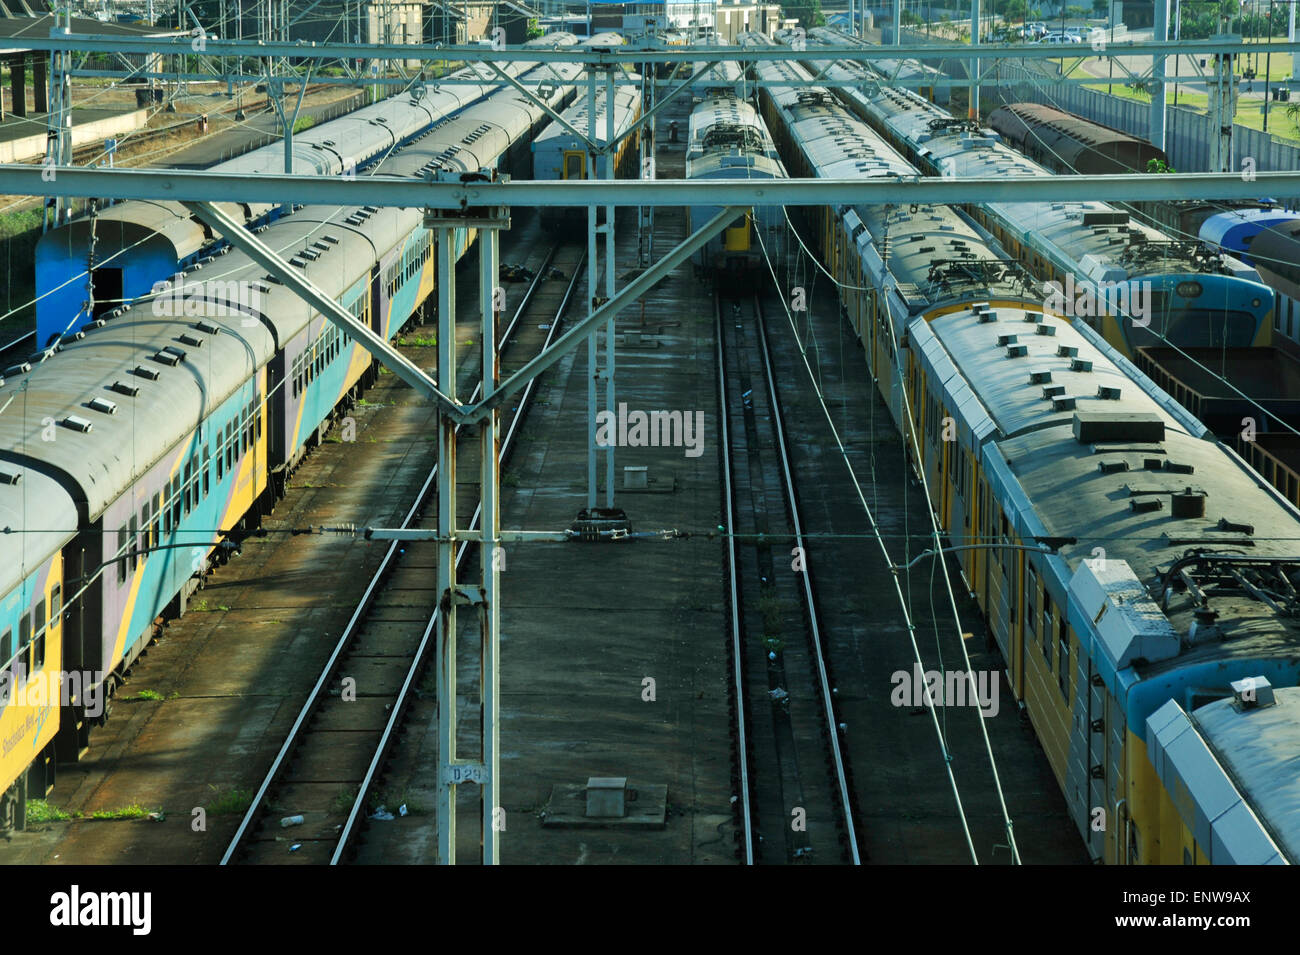 Carriages of commuter trains parked in train yard, Durban, South Africa ...